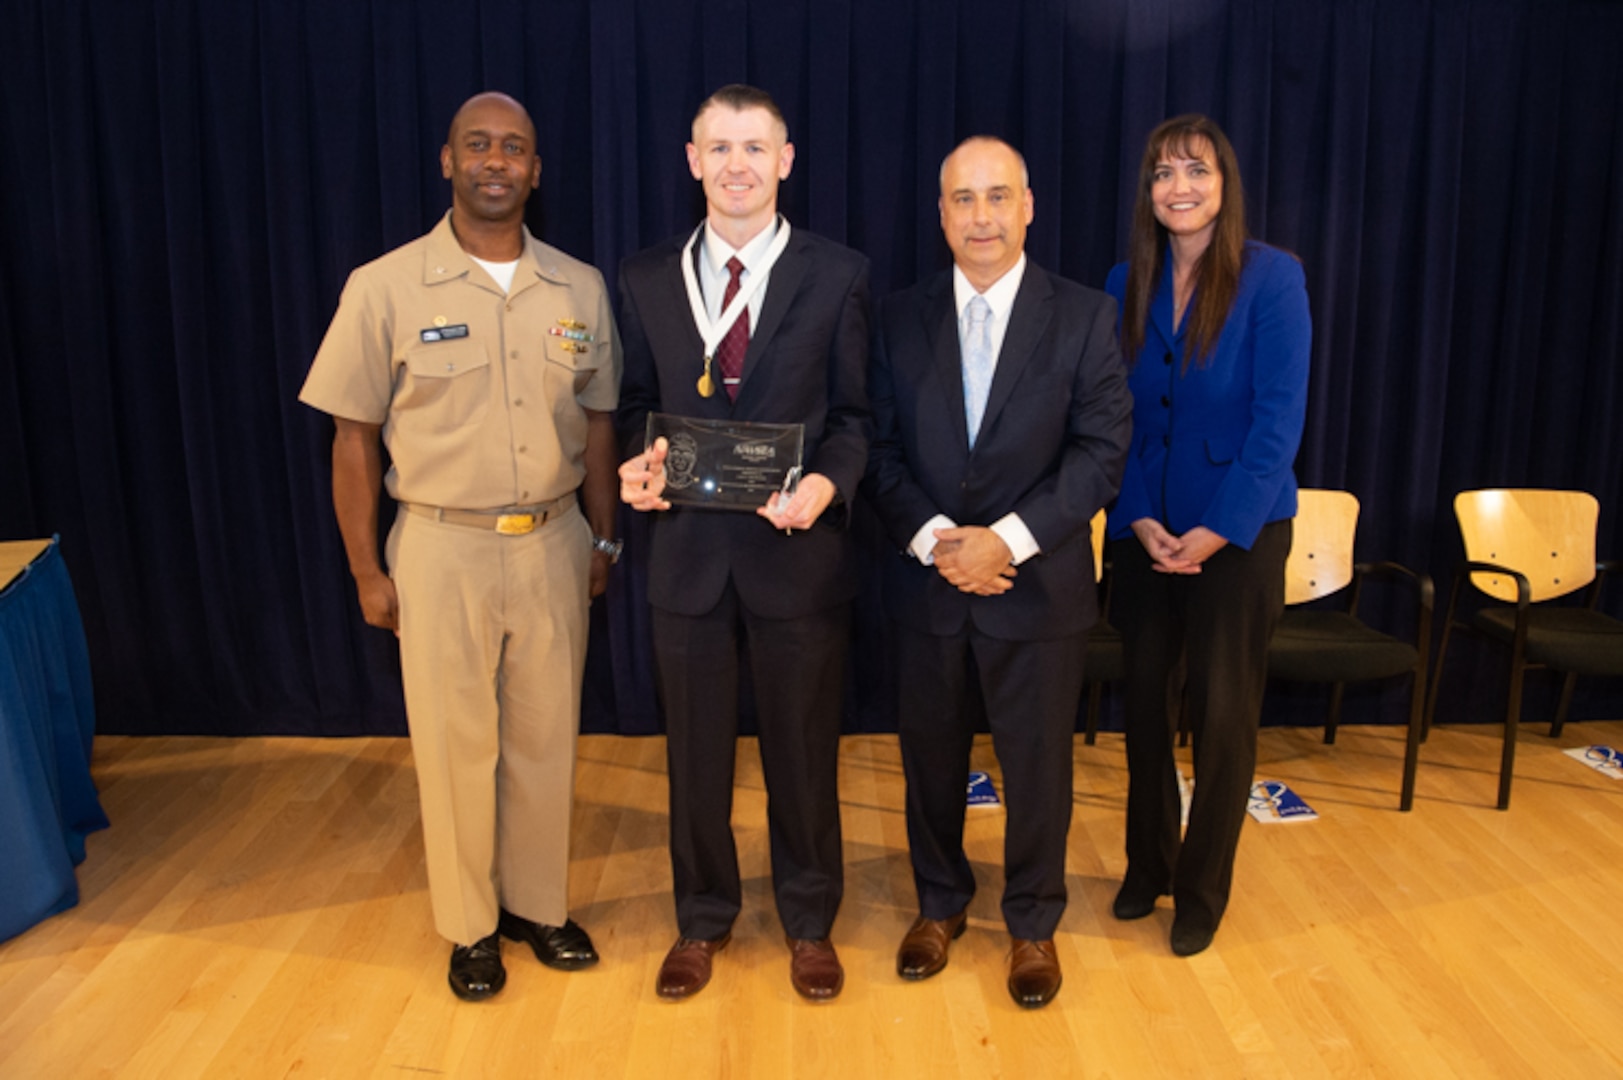 Luke Van Buskirk, deputy head for the Corporate Operations (Property) Department, receives the Rear Adm. Grace Hopper Award the Naval Surface Warfare Center, Carderock Division Honor Awards on Sept. 10, 2019, in West Bethesda, Md. With Van Buskirk is Commanding Officer Capt. Cedric McNeal, Technical Director Larry Tarasek and Corporate Operations Department Head Tamar Gallagher. (U.S. Navy photo by Nicholas Brezzell/Released)